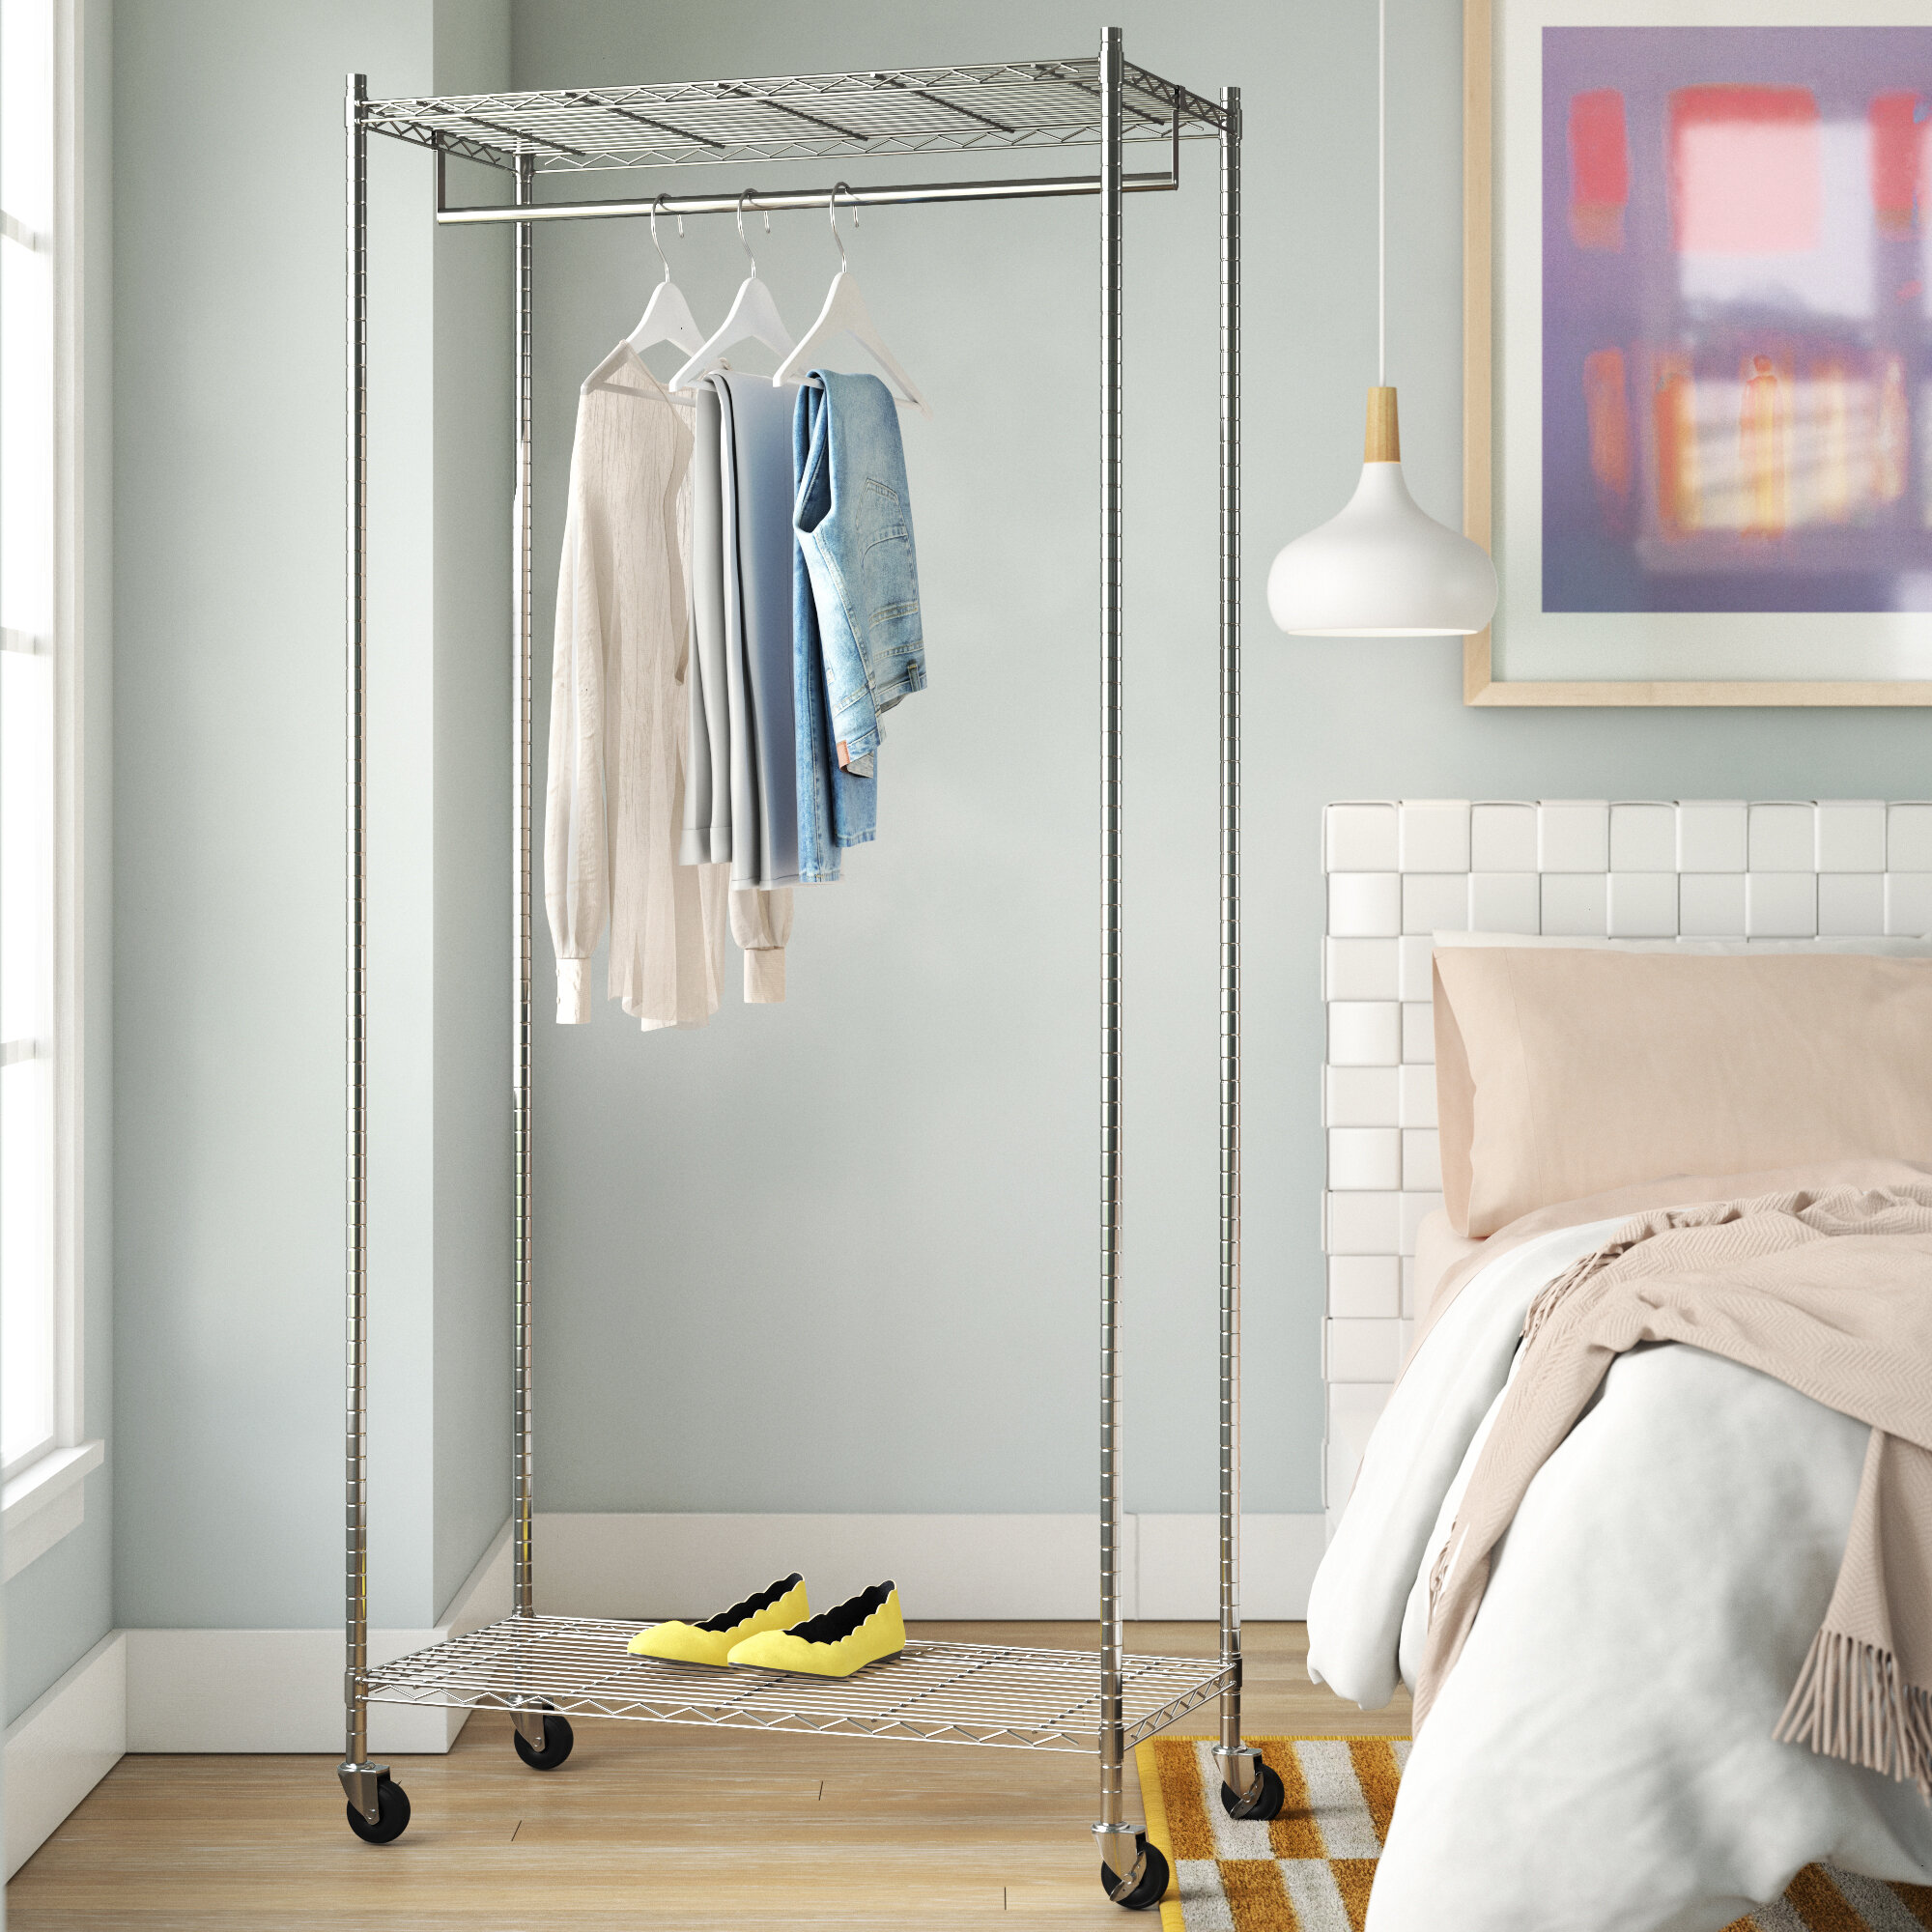 Freestanding Closet Wardrobe,Wire Garment Rack Heavy Duty Clothes Rack,Closet  Organizer Metal Garment Rack Portable Clothes Hanger Home Shelf (5 rows of  hanging bar plus 7 layers of shelves with 1 row of